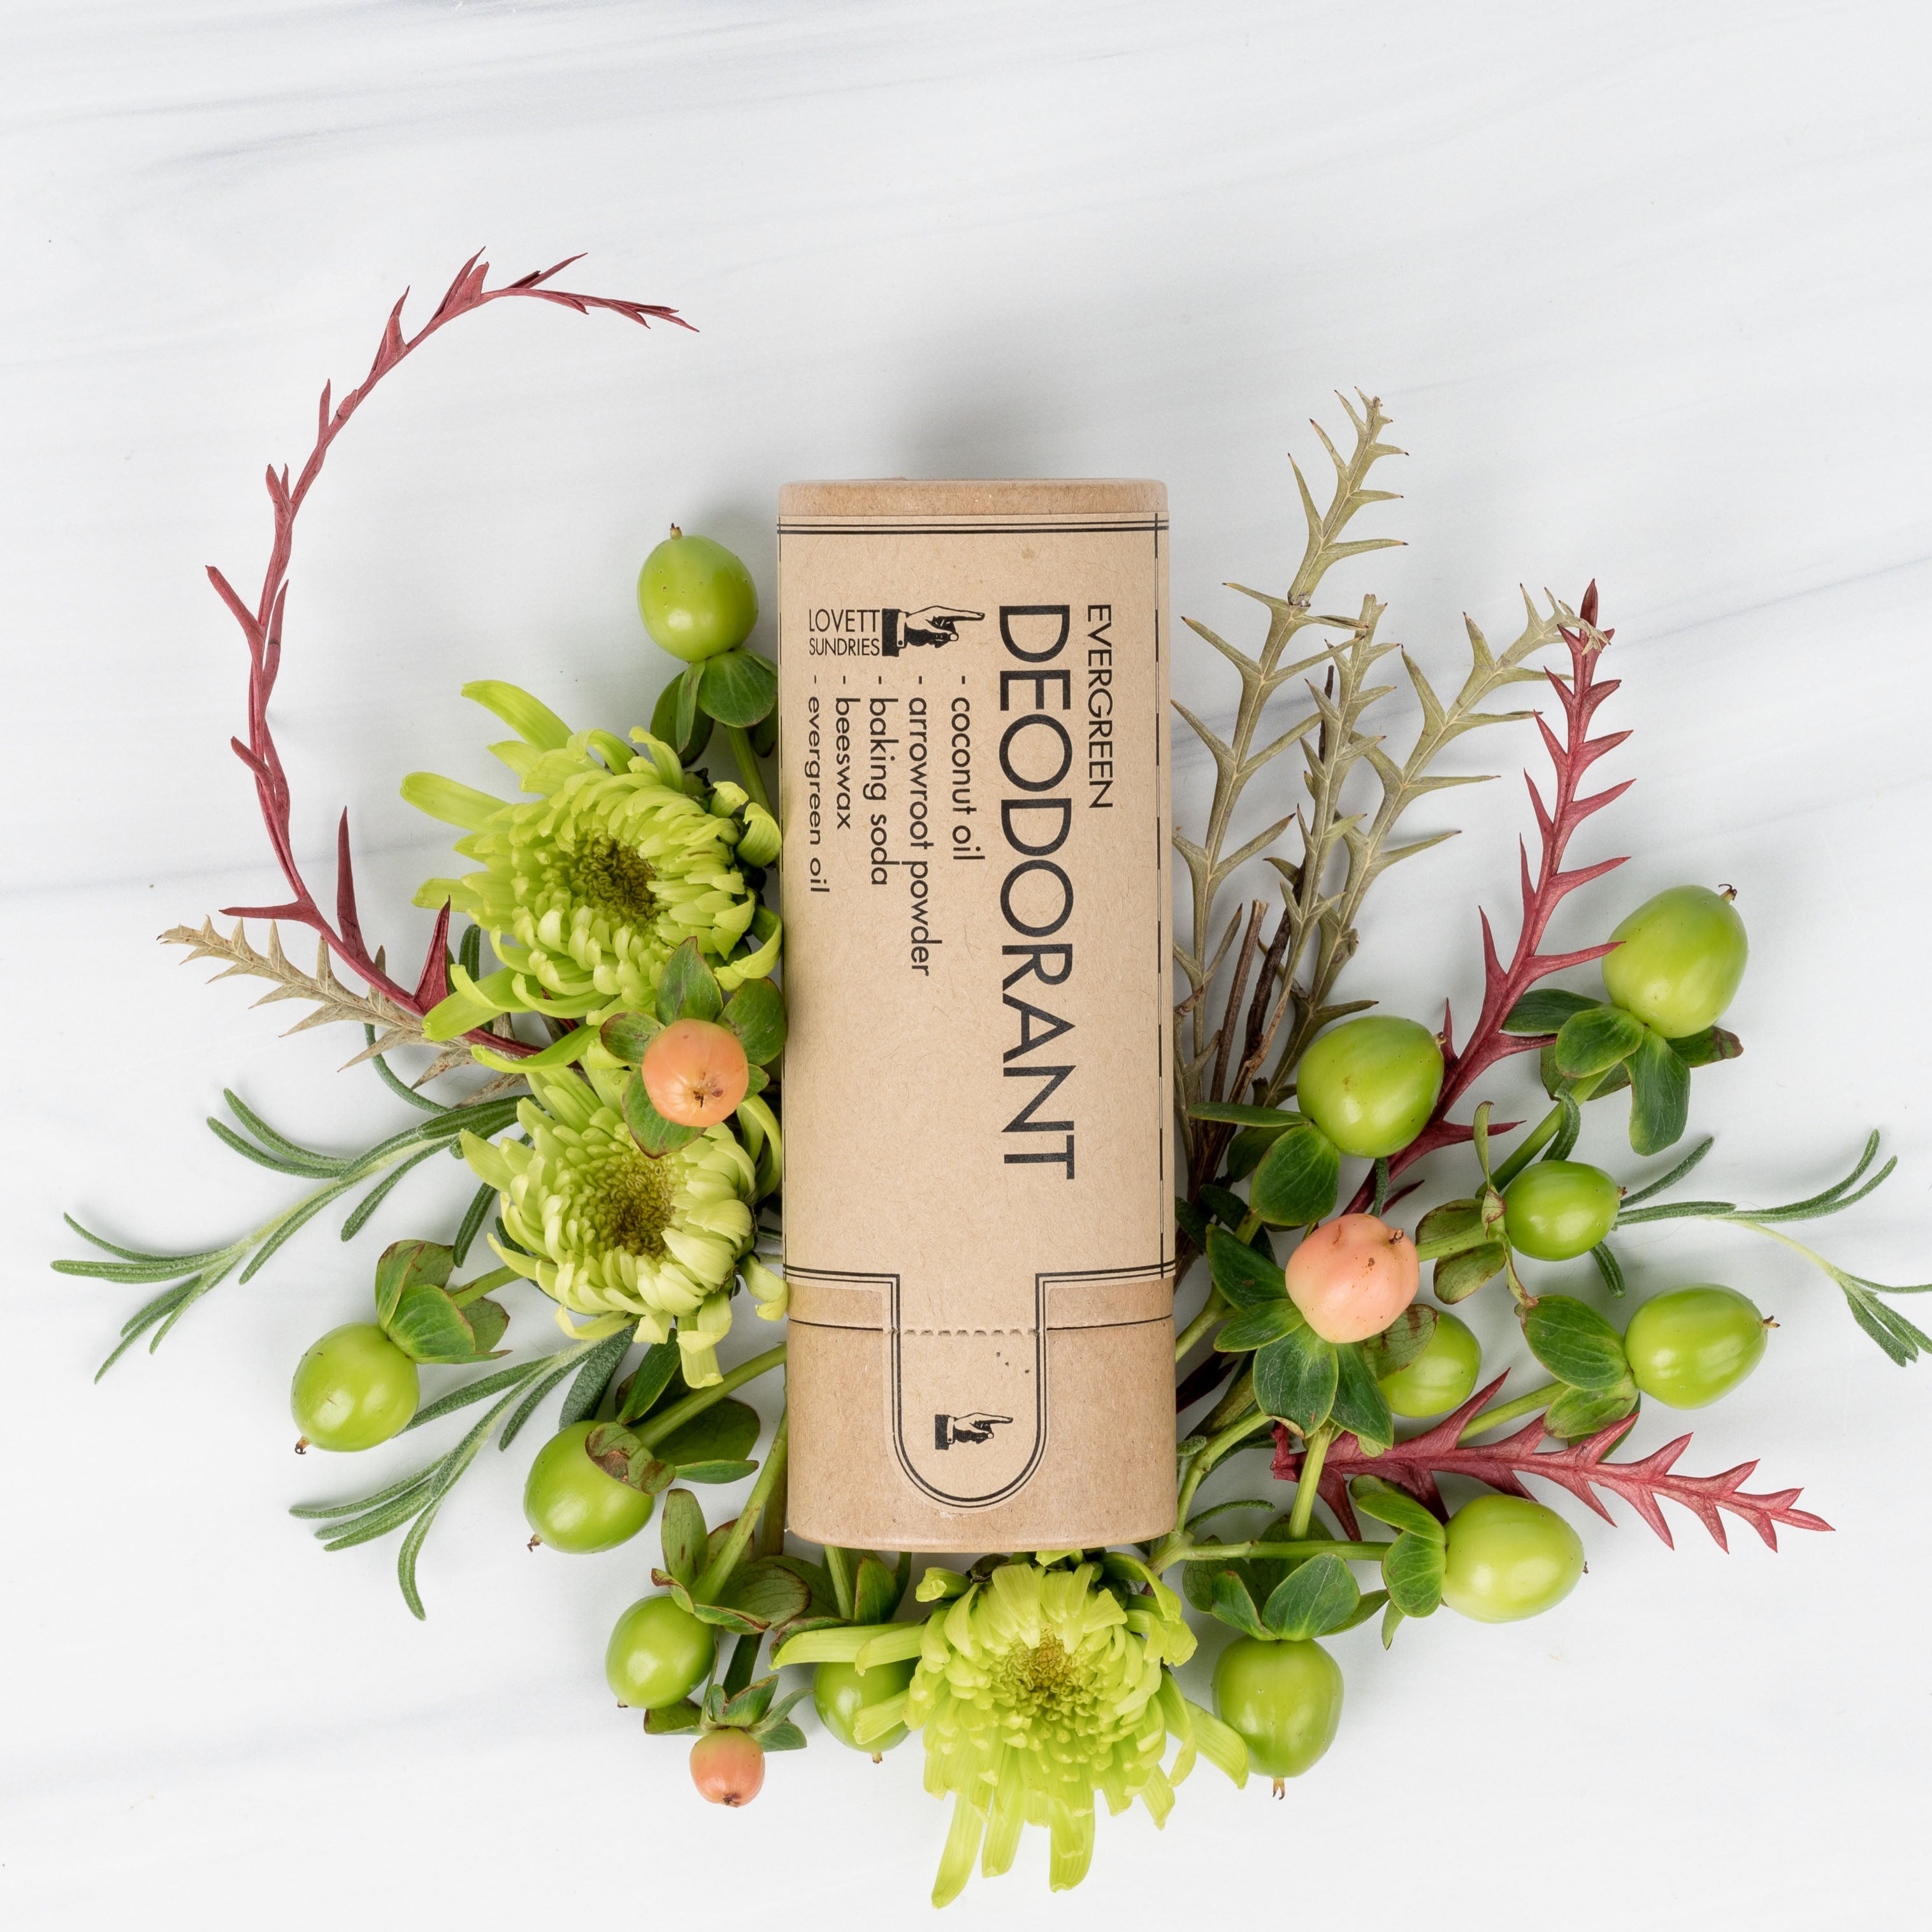 evergreen-scented aluminum-free deodorant surrounded by fresh flowers.